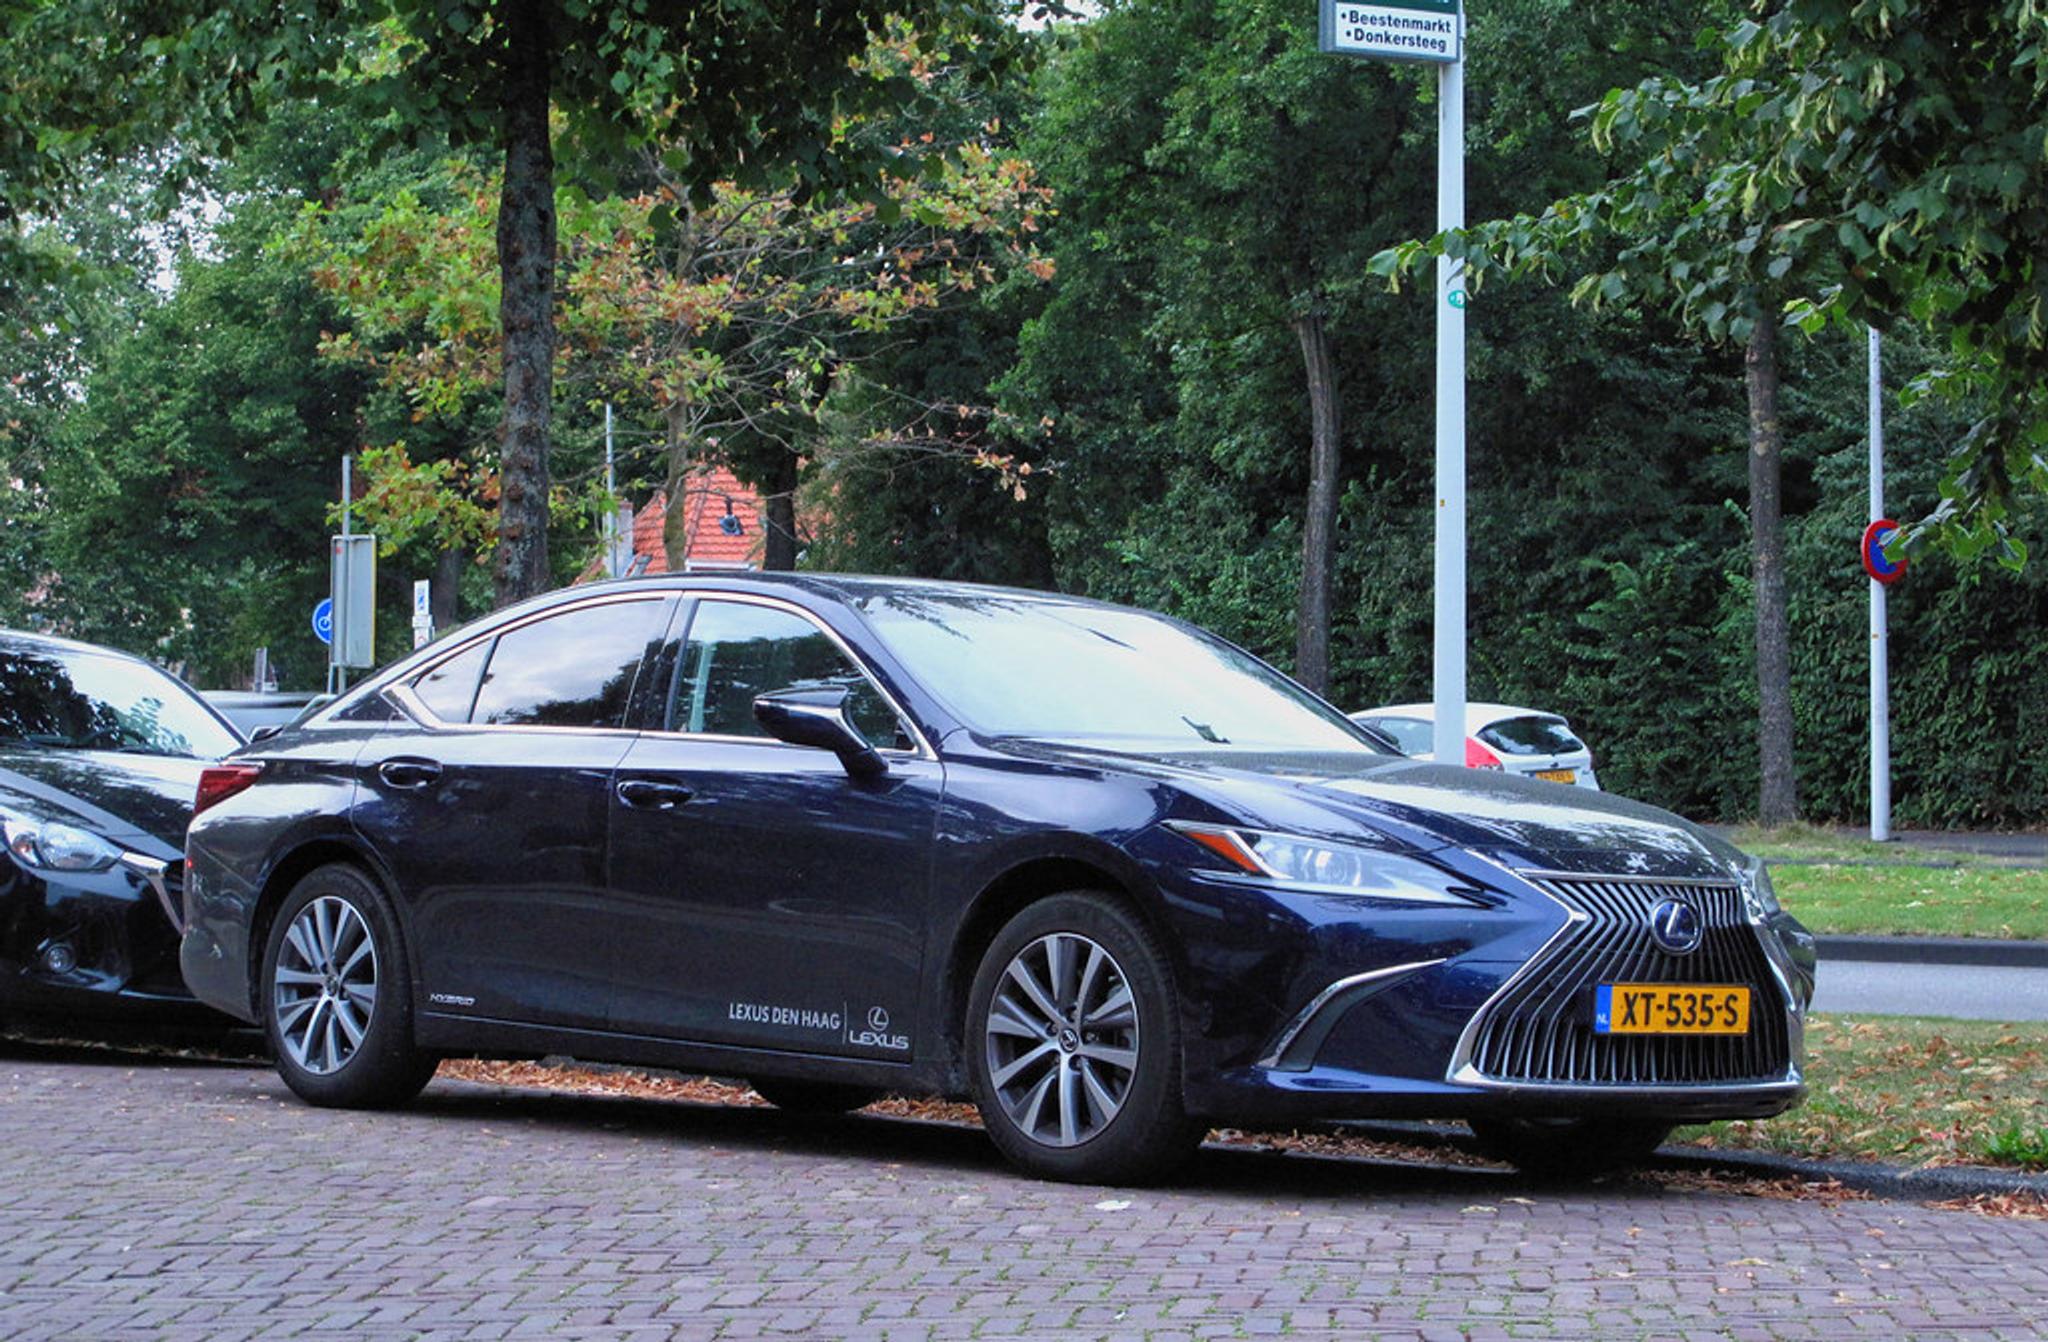 Dark blue Lexus ES parked by the side of the road